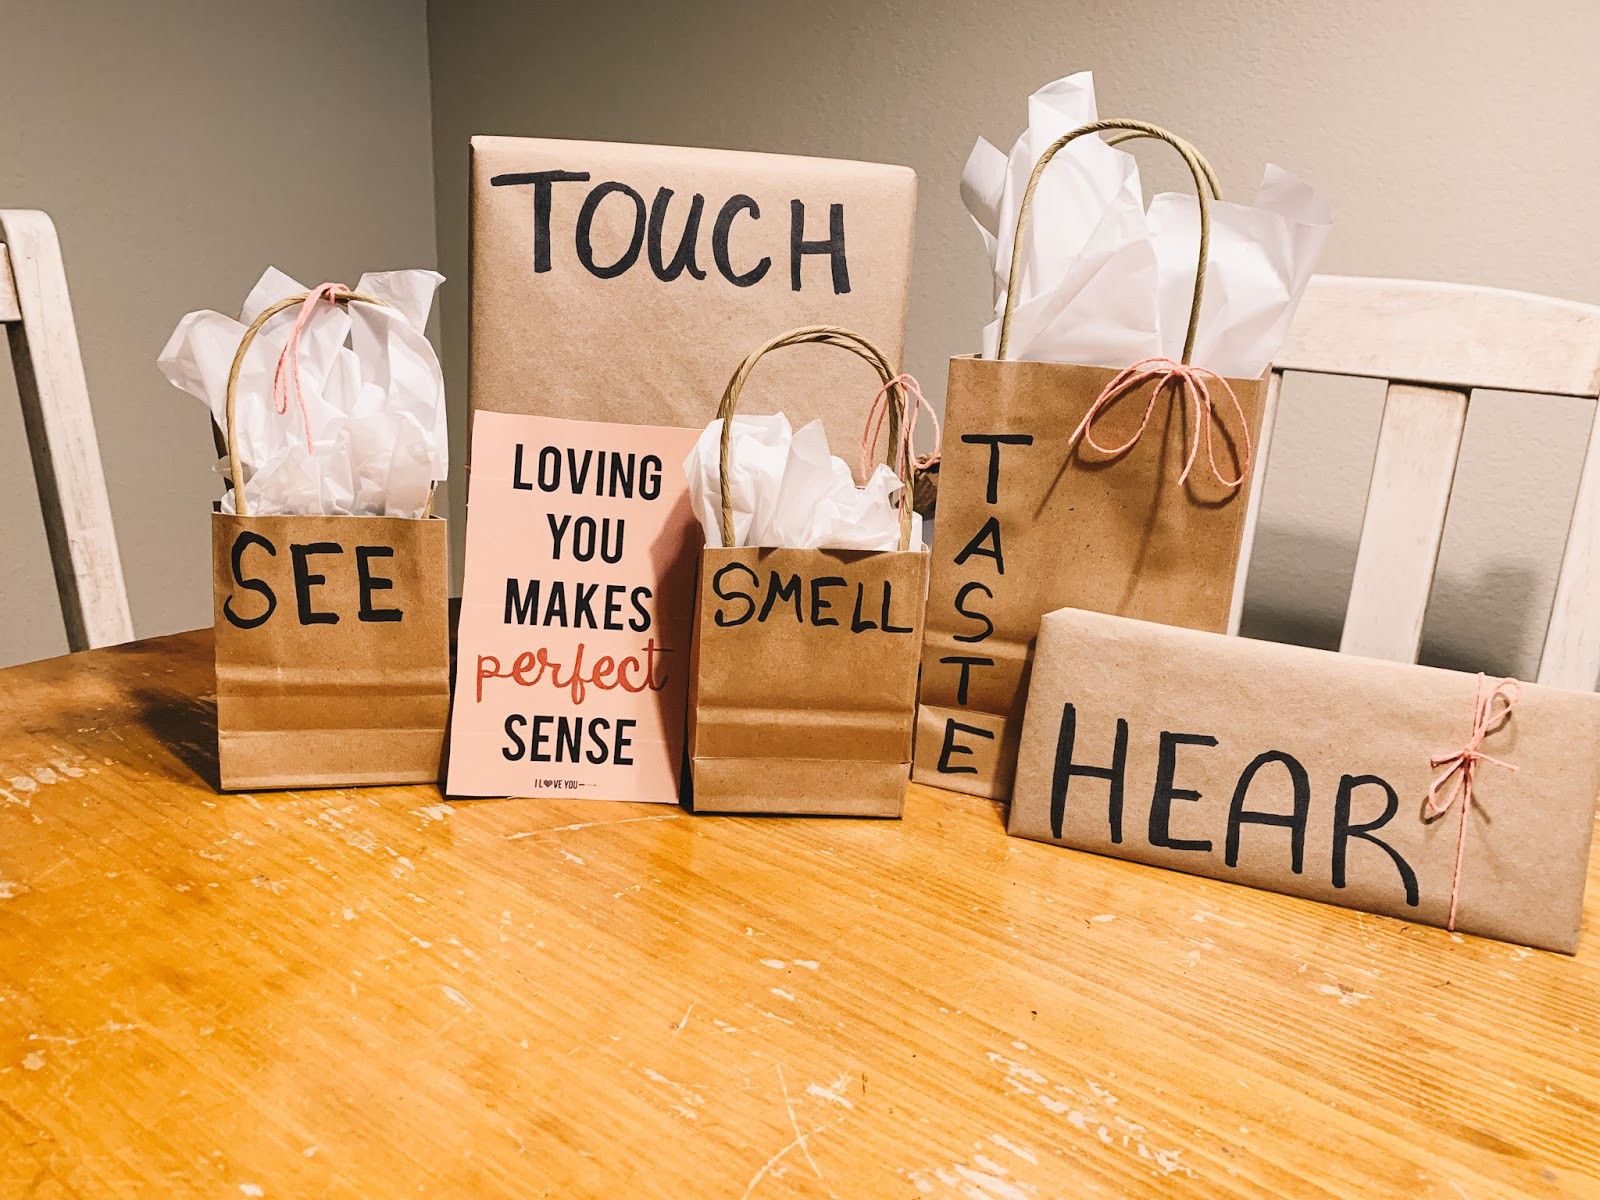 Creative Valentines Day Ideas For Him
 The 5 Senses Valentines Day Gift Ideas for Him & Her